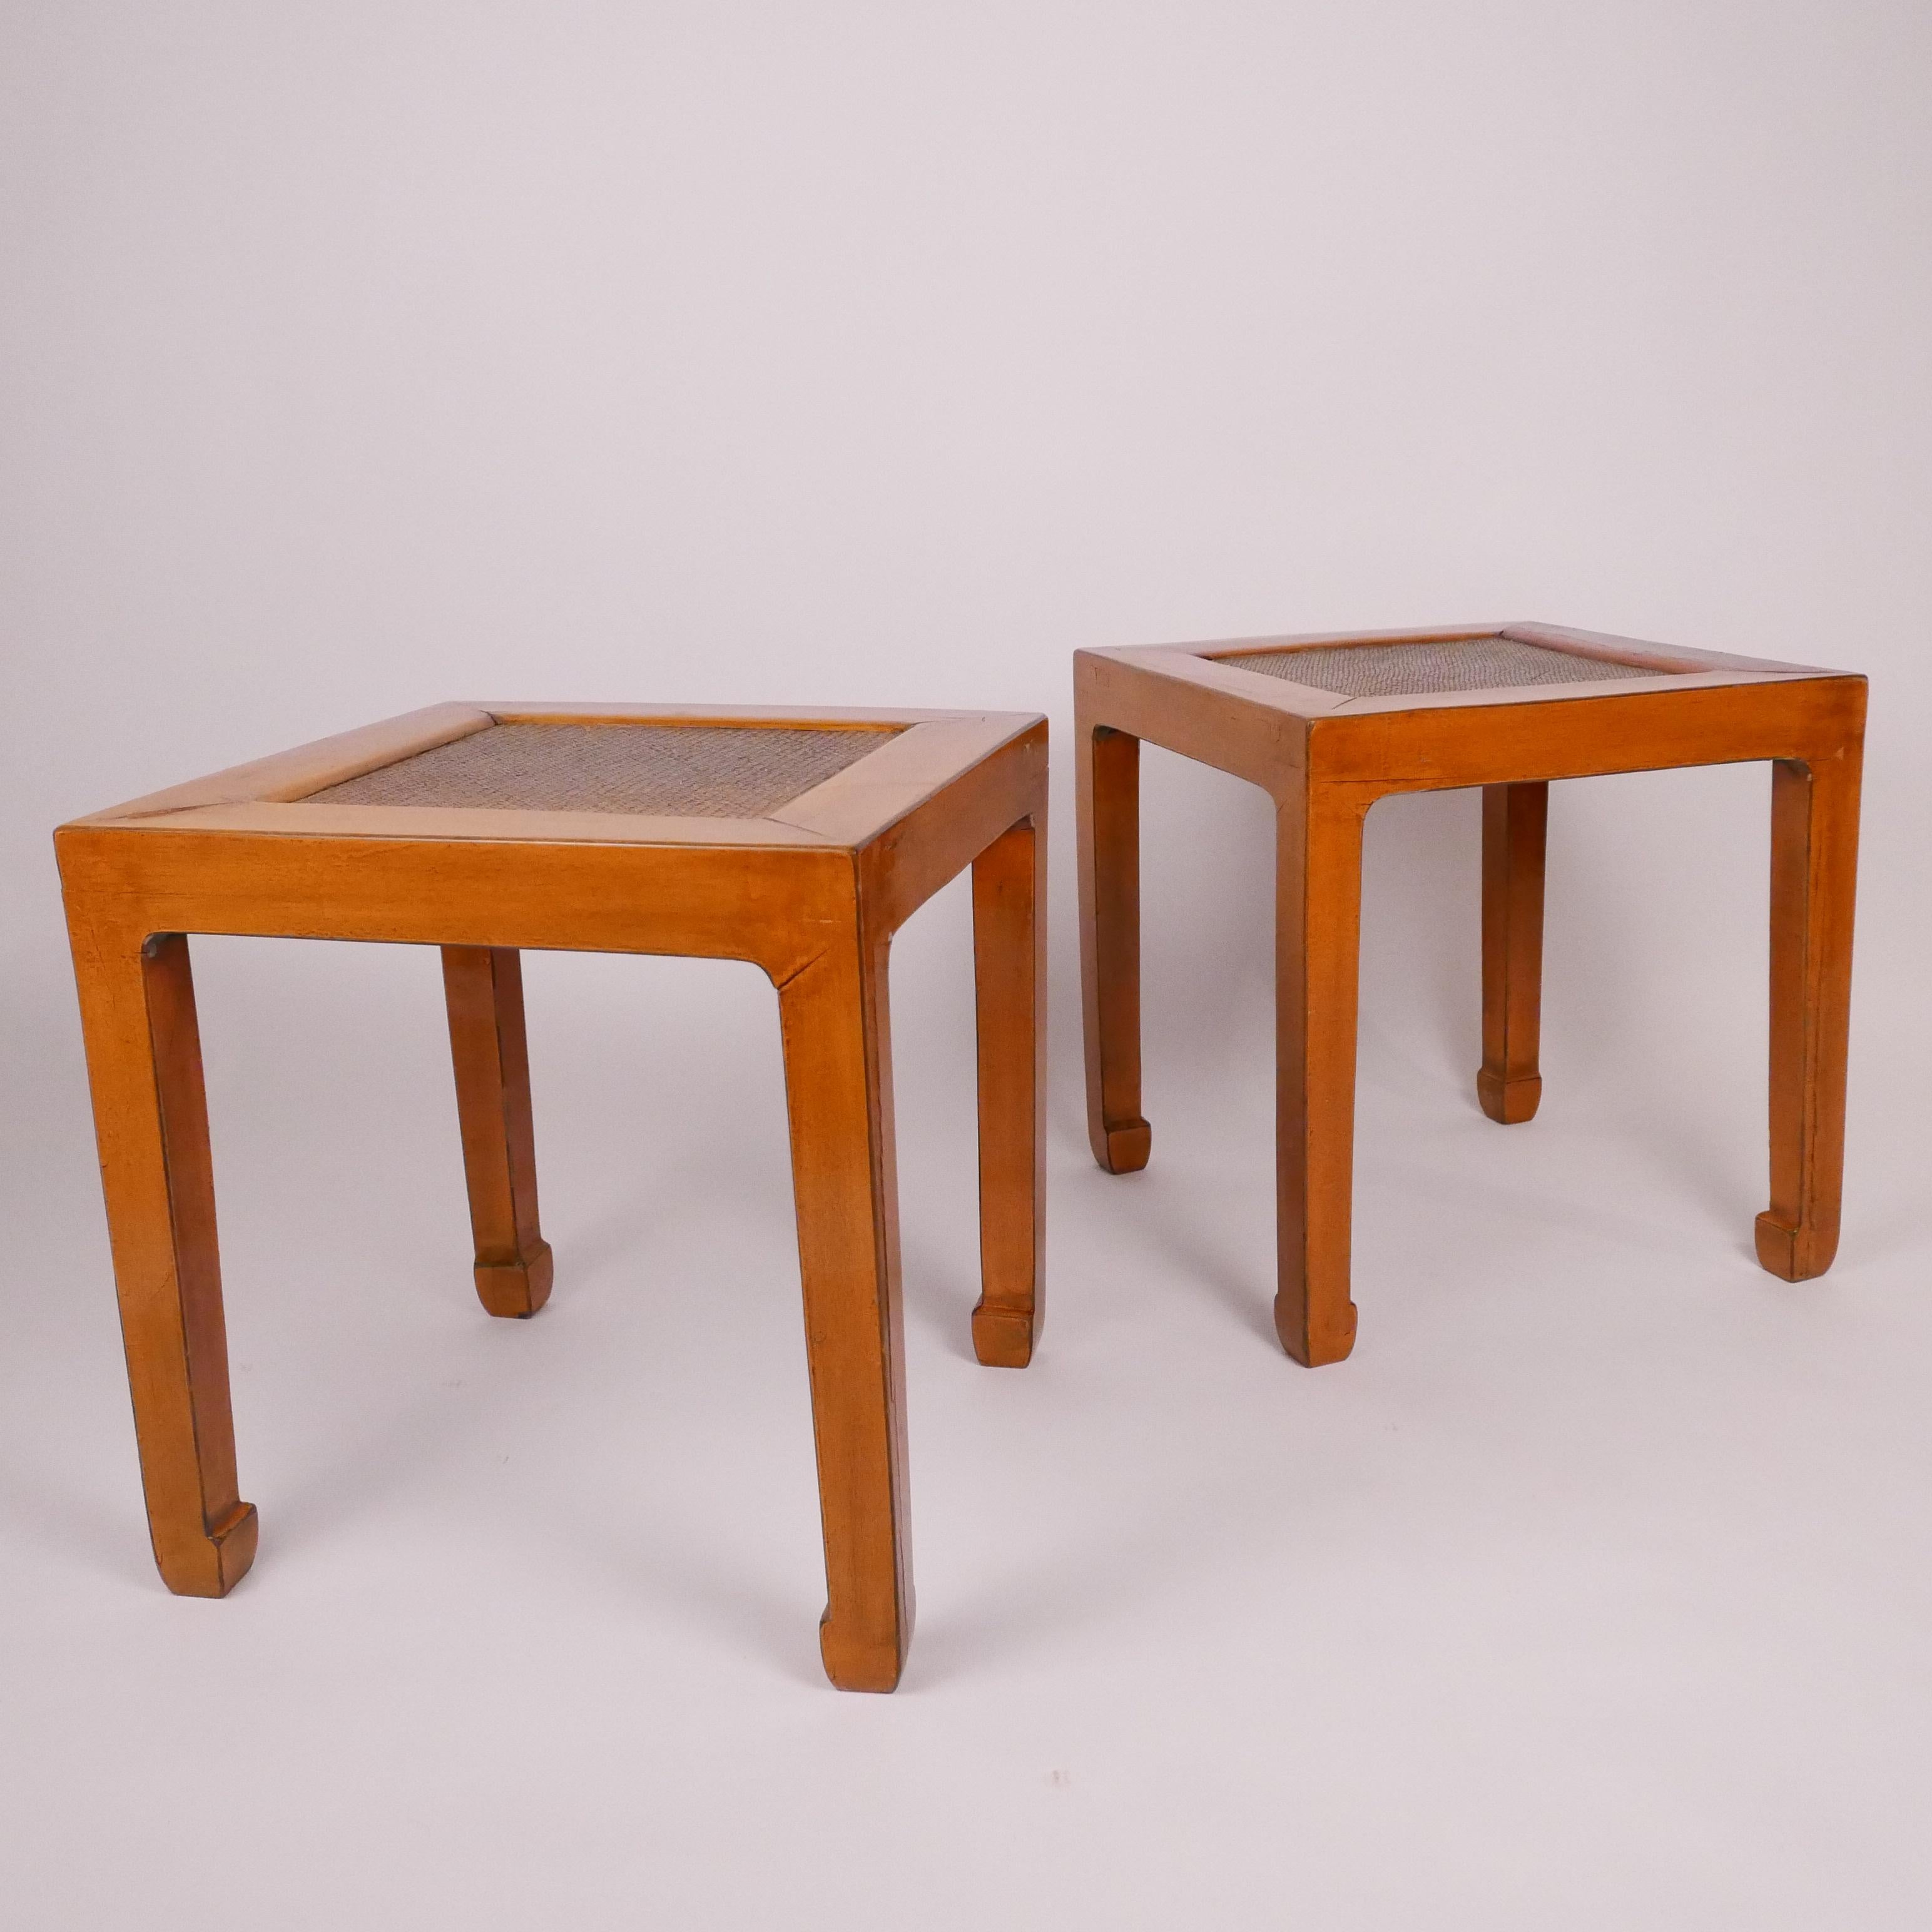 Heavy pair of lovely Asian end tables used by Edward Wormley.
Provenance: Property from a CT. house redecorated and furnished by Edward Wormley & Associates, 1957-1958 . Gorgeous construction and patina.